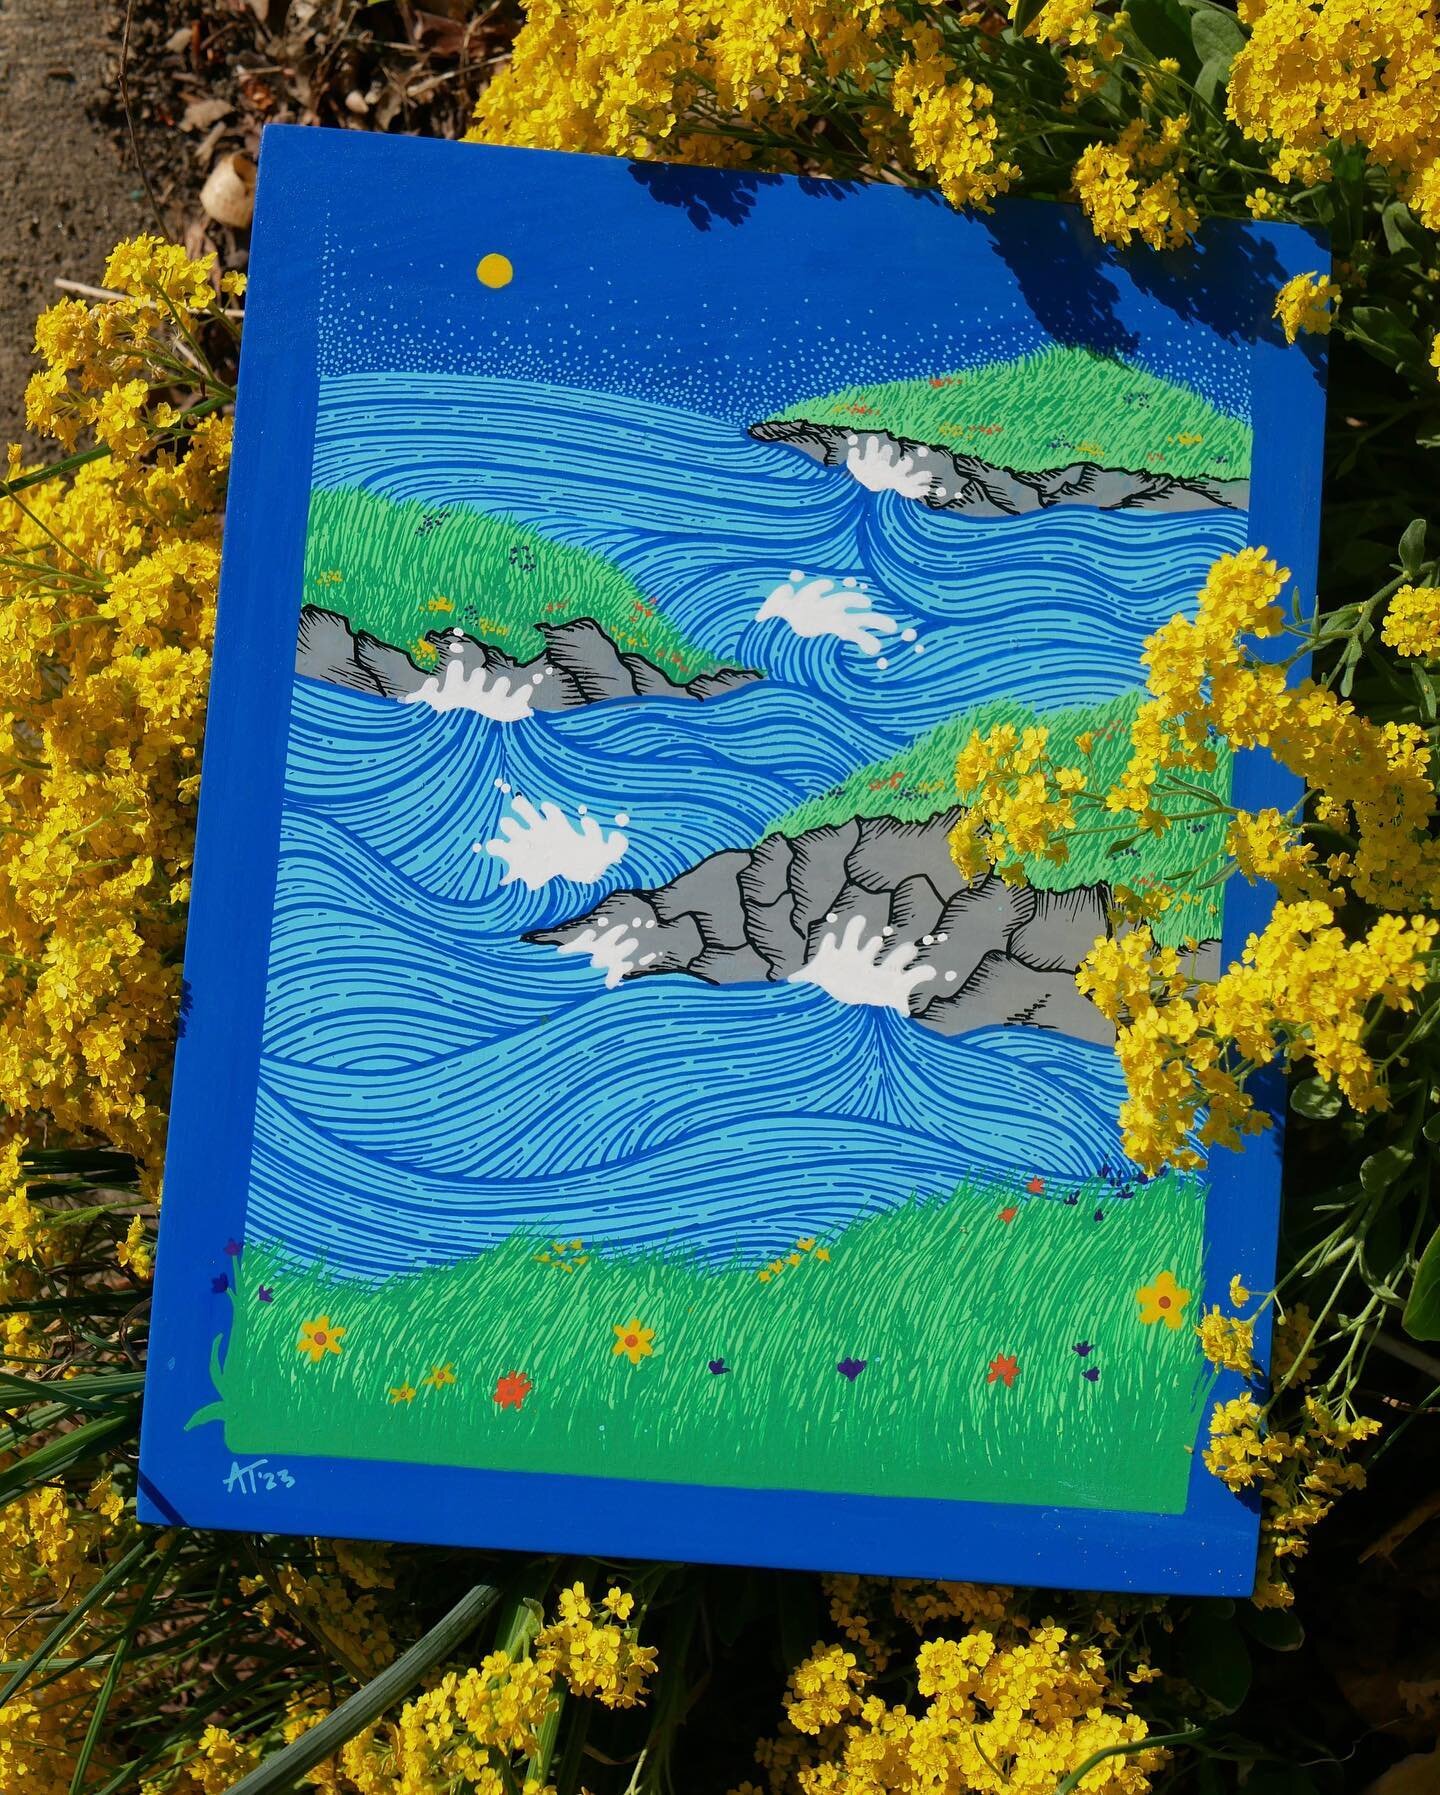 🌼 &lsquo;Spring at Sachuest&rsquo; 🌼
POSCA Pens on 8&rdquo;x10&rdquo; wood panel
Inspired by the beautiful coastline of Sachuest Point during this beautiful time of the year 🌊
⠀
⠀
⠀
⠀
⠀
⠀
⠀
⠀
⠀
#springtime #springflowers #naturedrawing #natureinsp